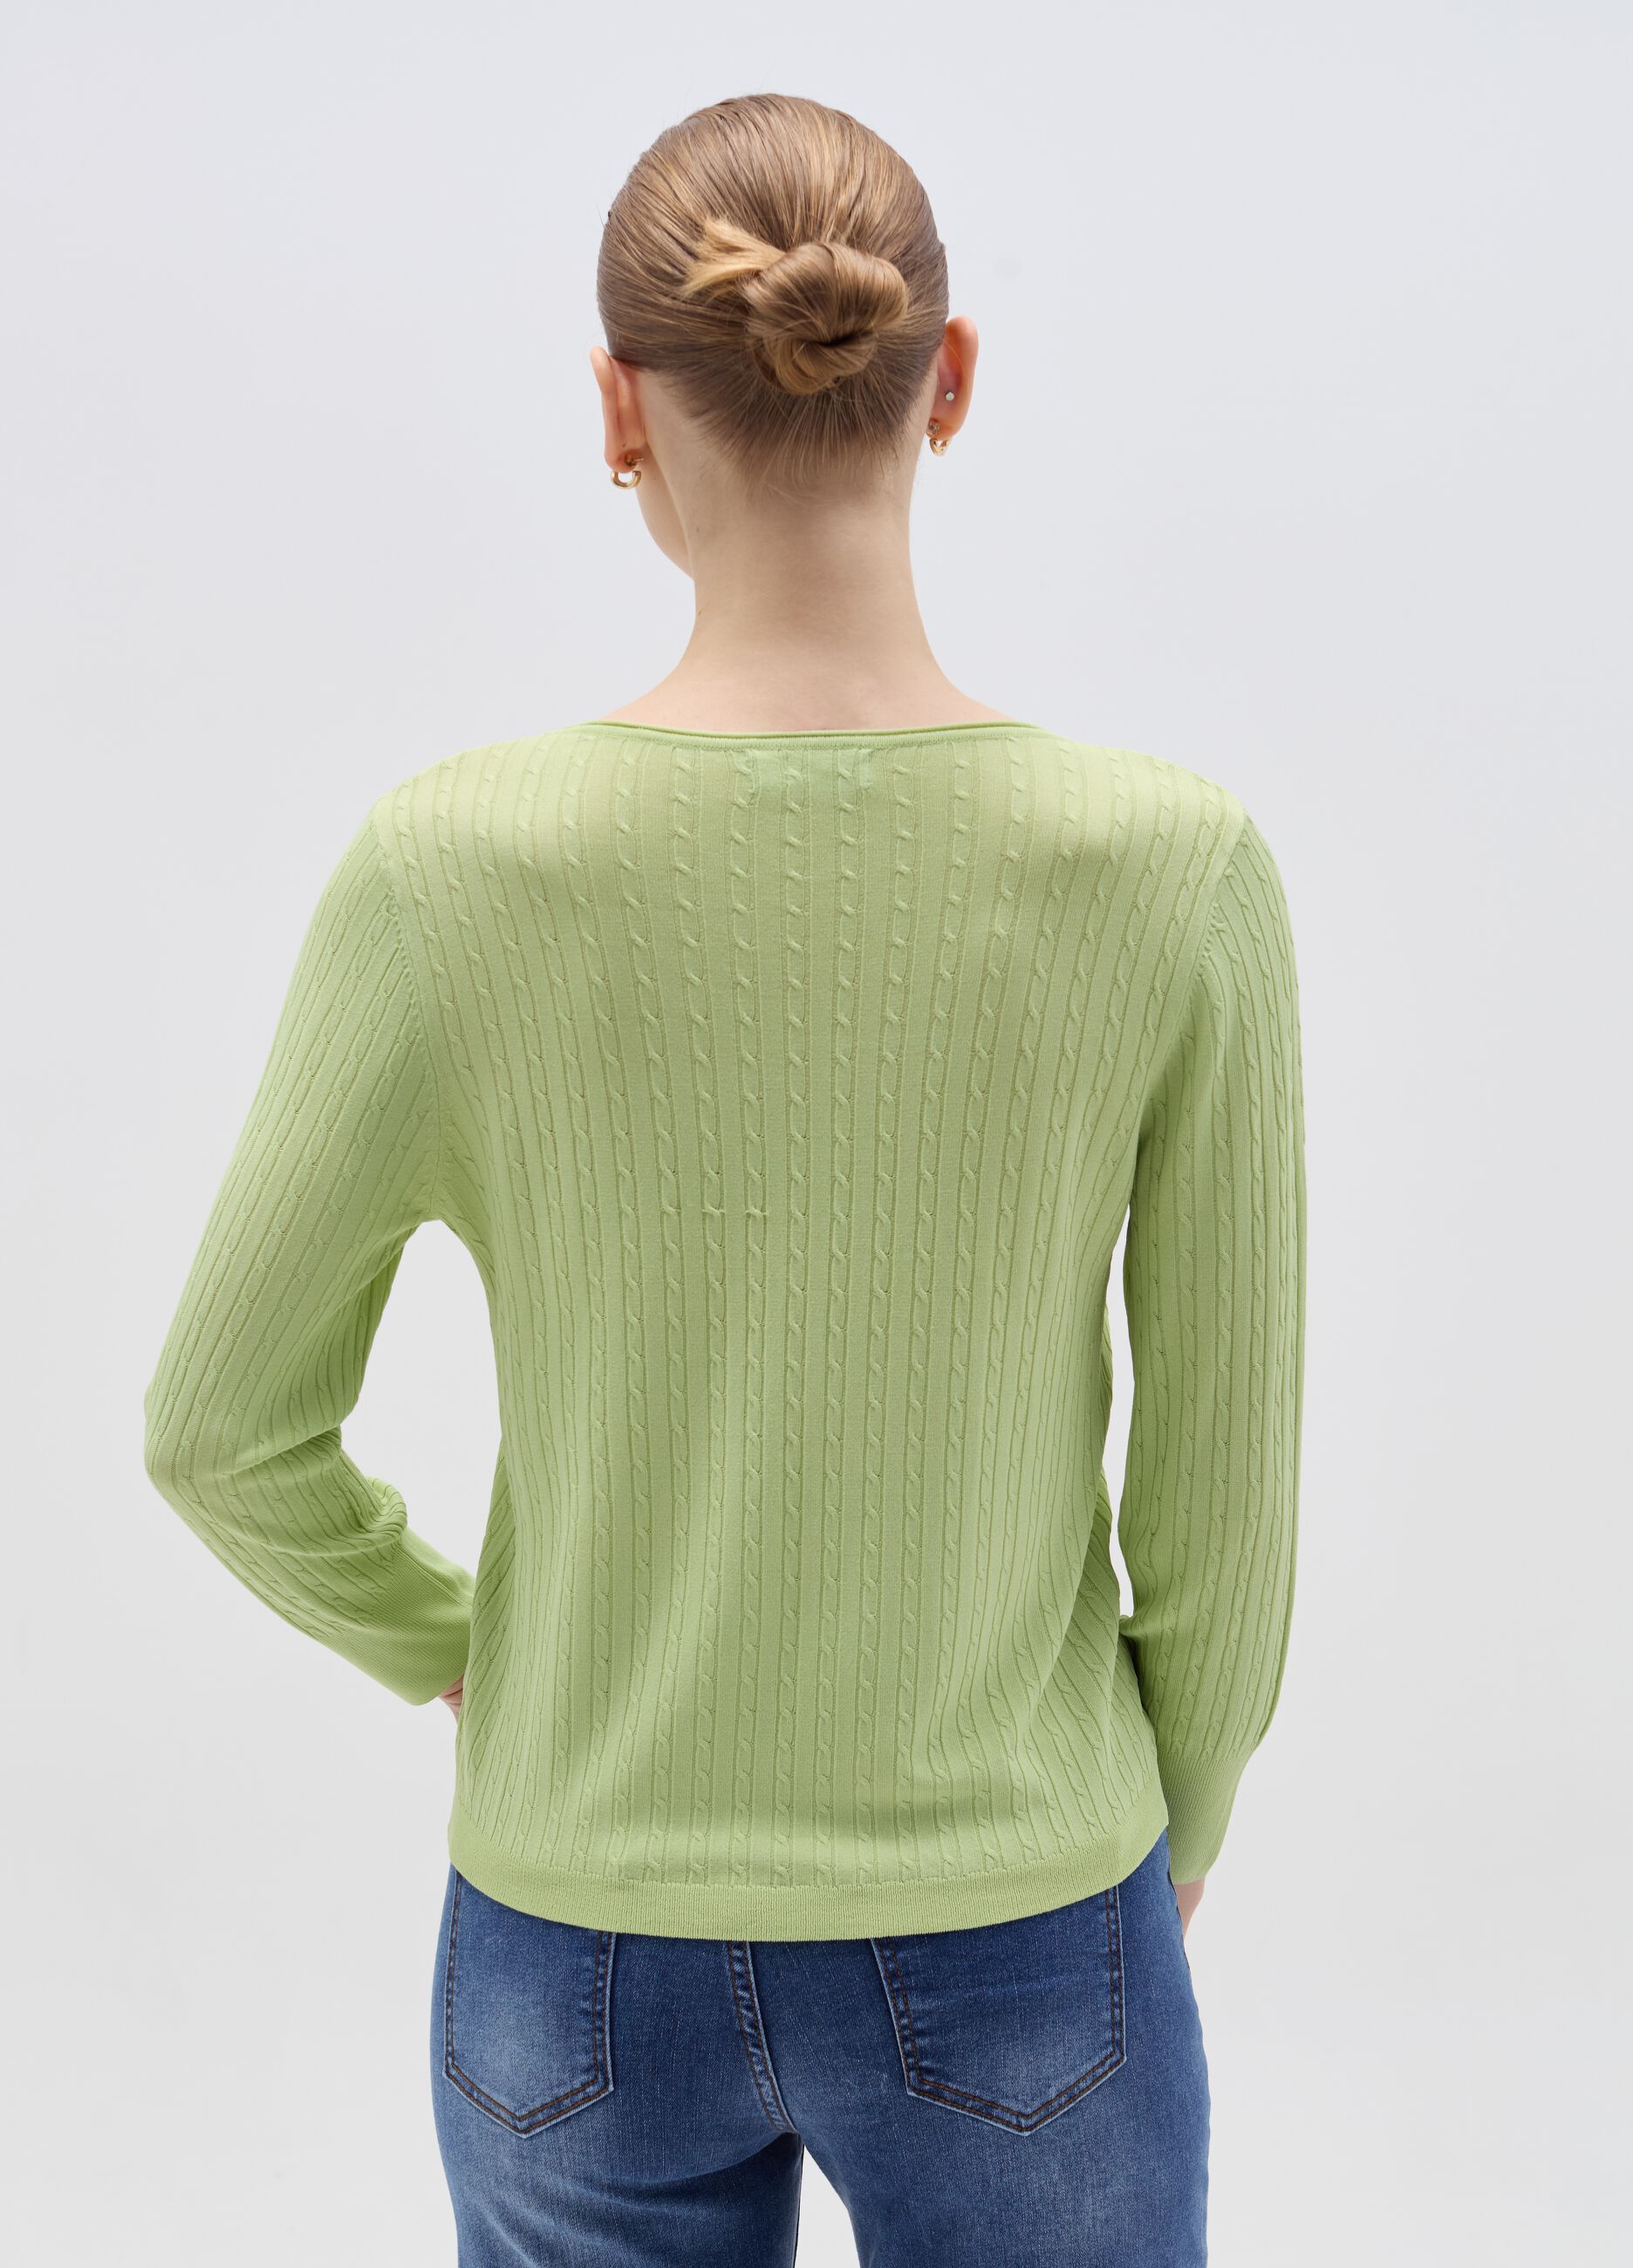 Top with cable-knit design